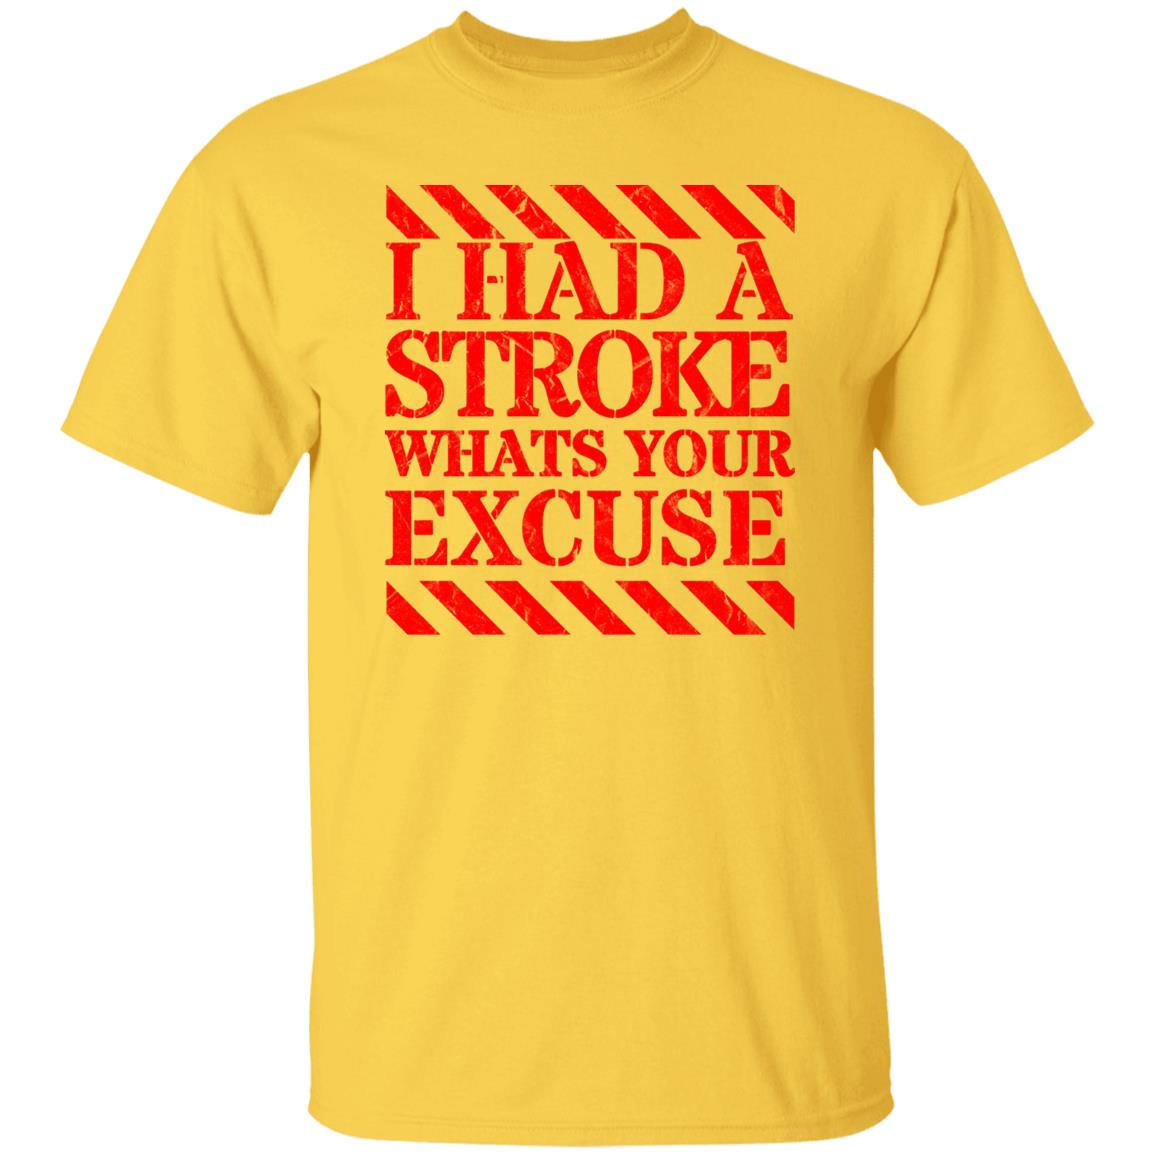 I had a stroke what's your excuse T-Shirt Red - Expressive DeZien 